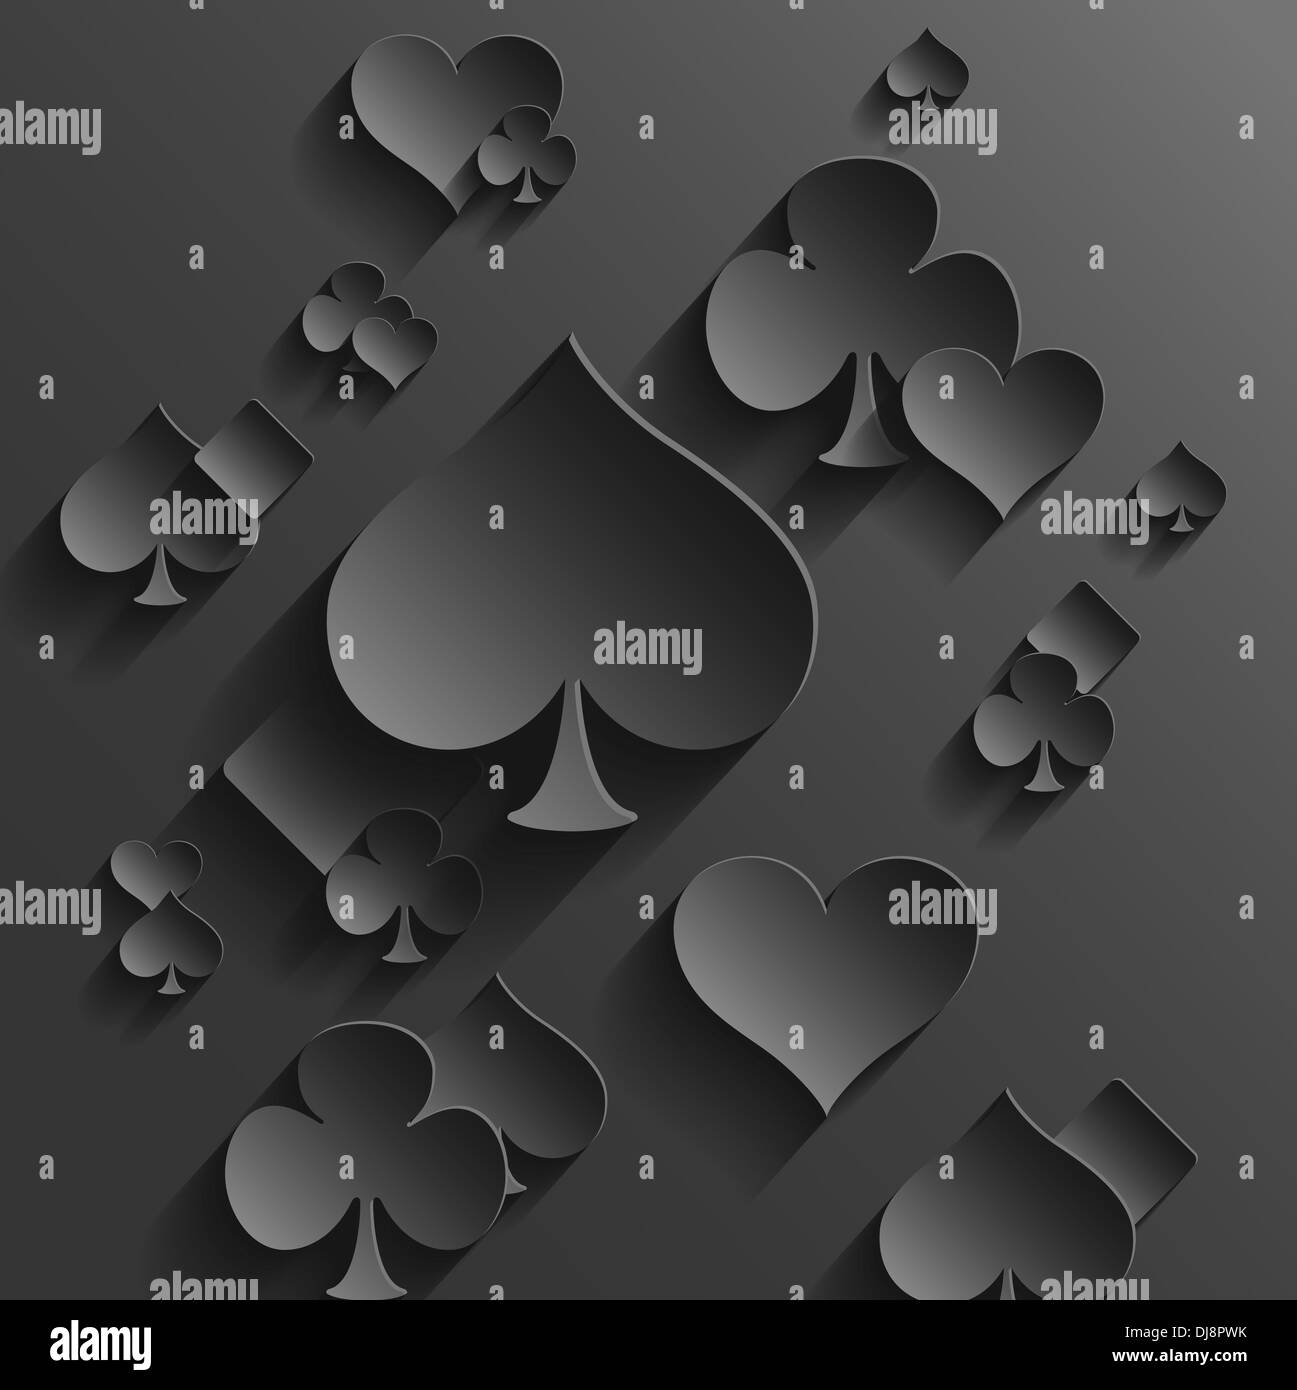 Abstract Background with Playing Cards Elements Stock Photo